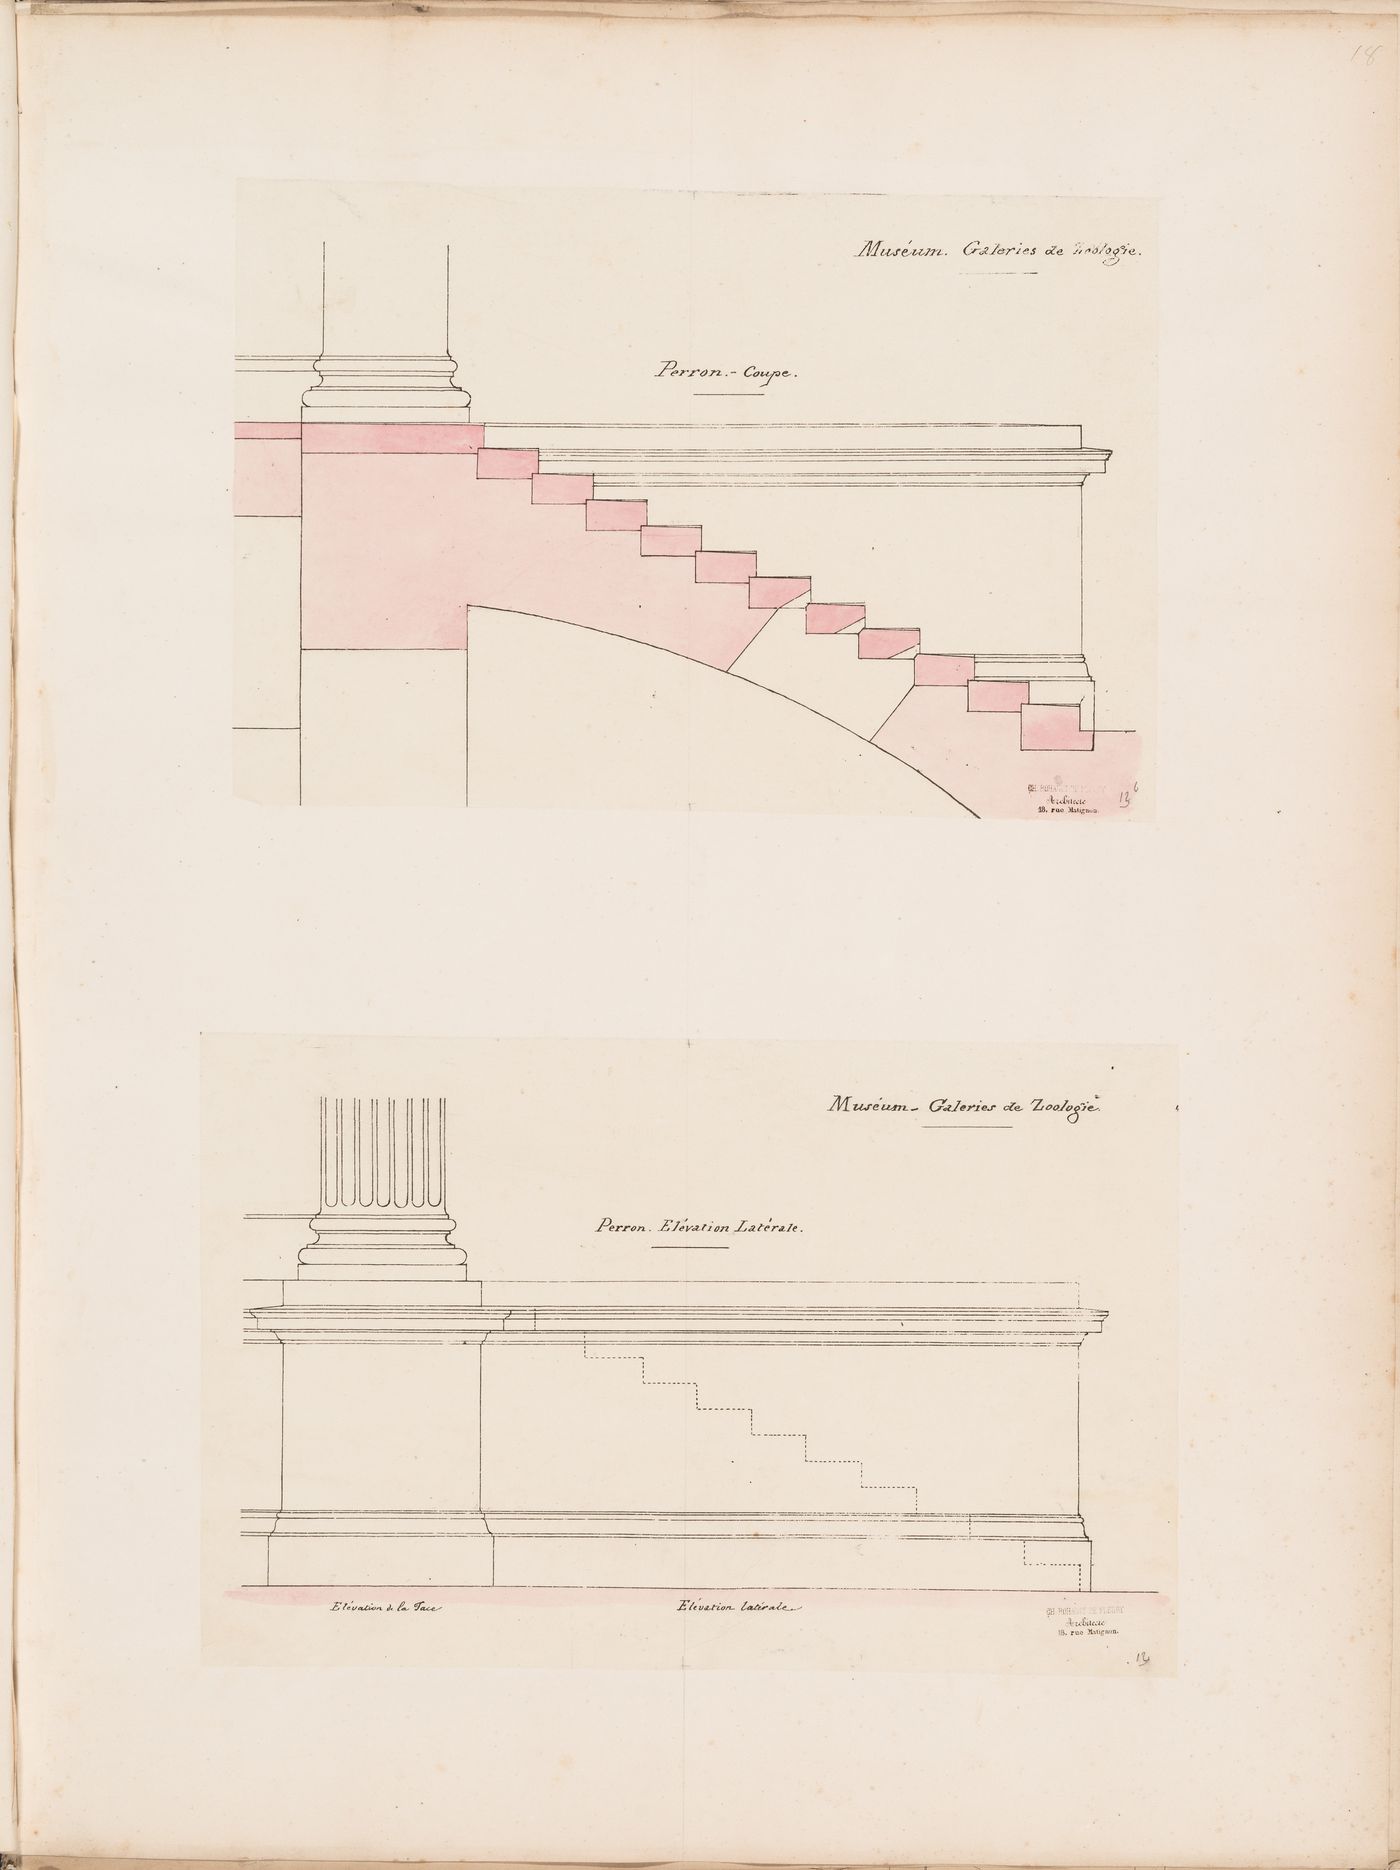 Project for a Galerie de zoologie, 1846: Section and elevation for the perron